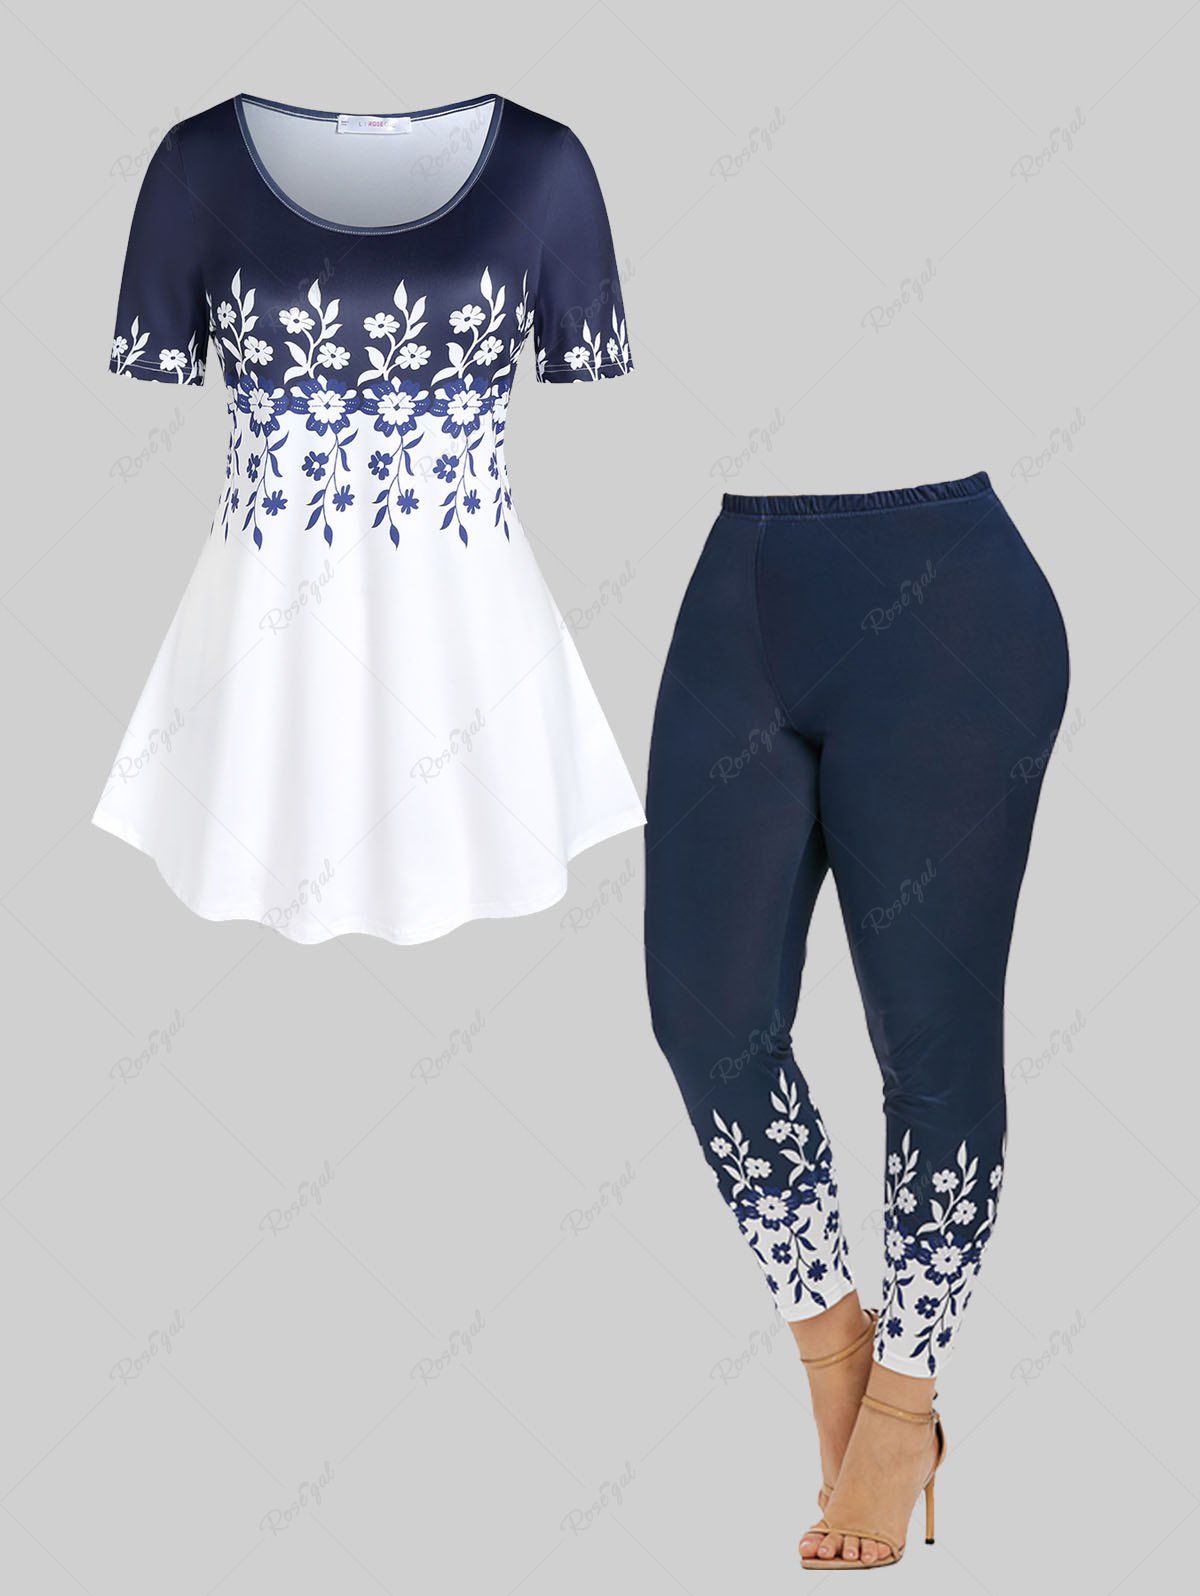 Shops Floral Colorblock T Shirt and High Waisted Floral Print Leggings Plus Size Summer Outfit  